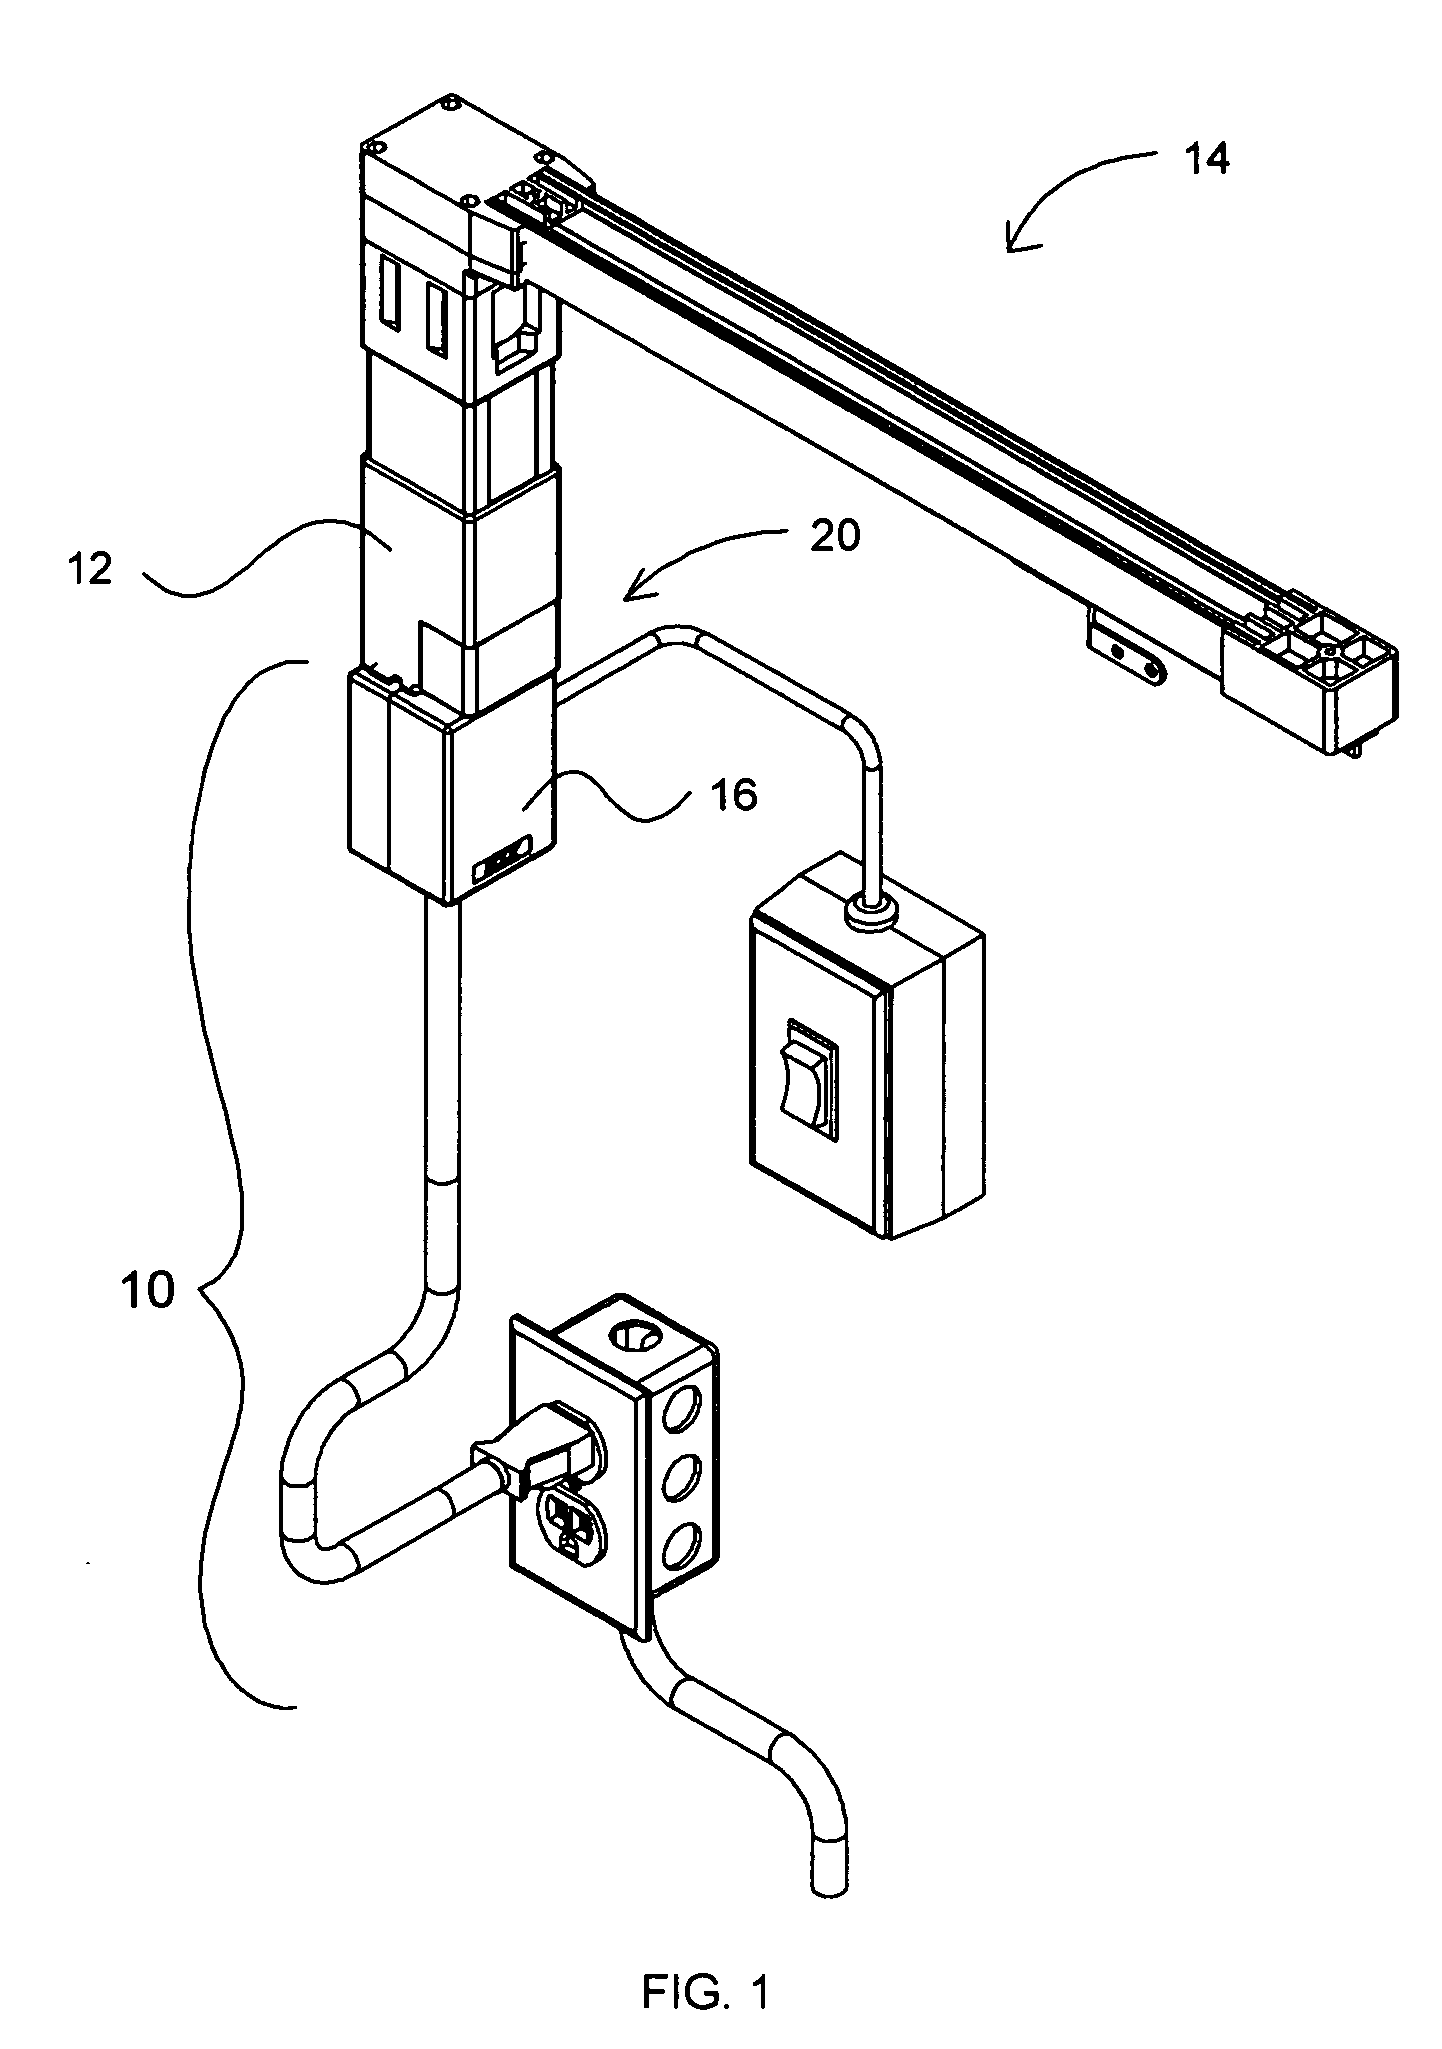 Modular motor converter for window covering systems